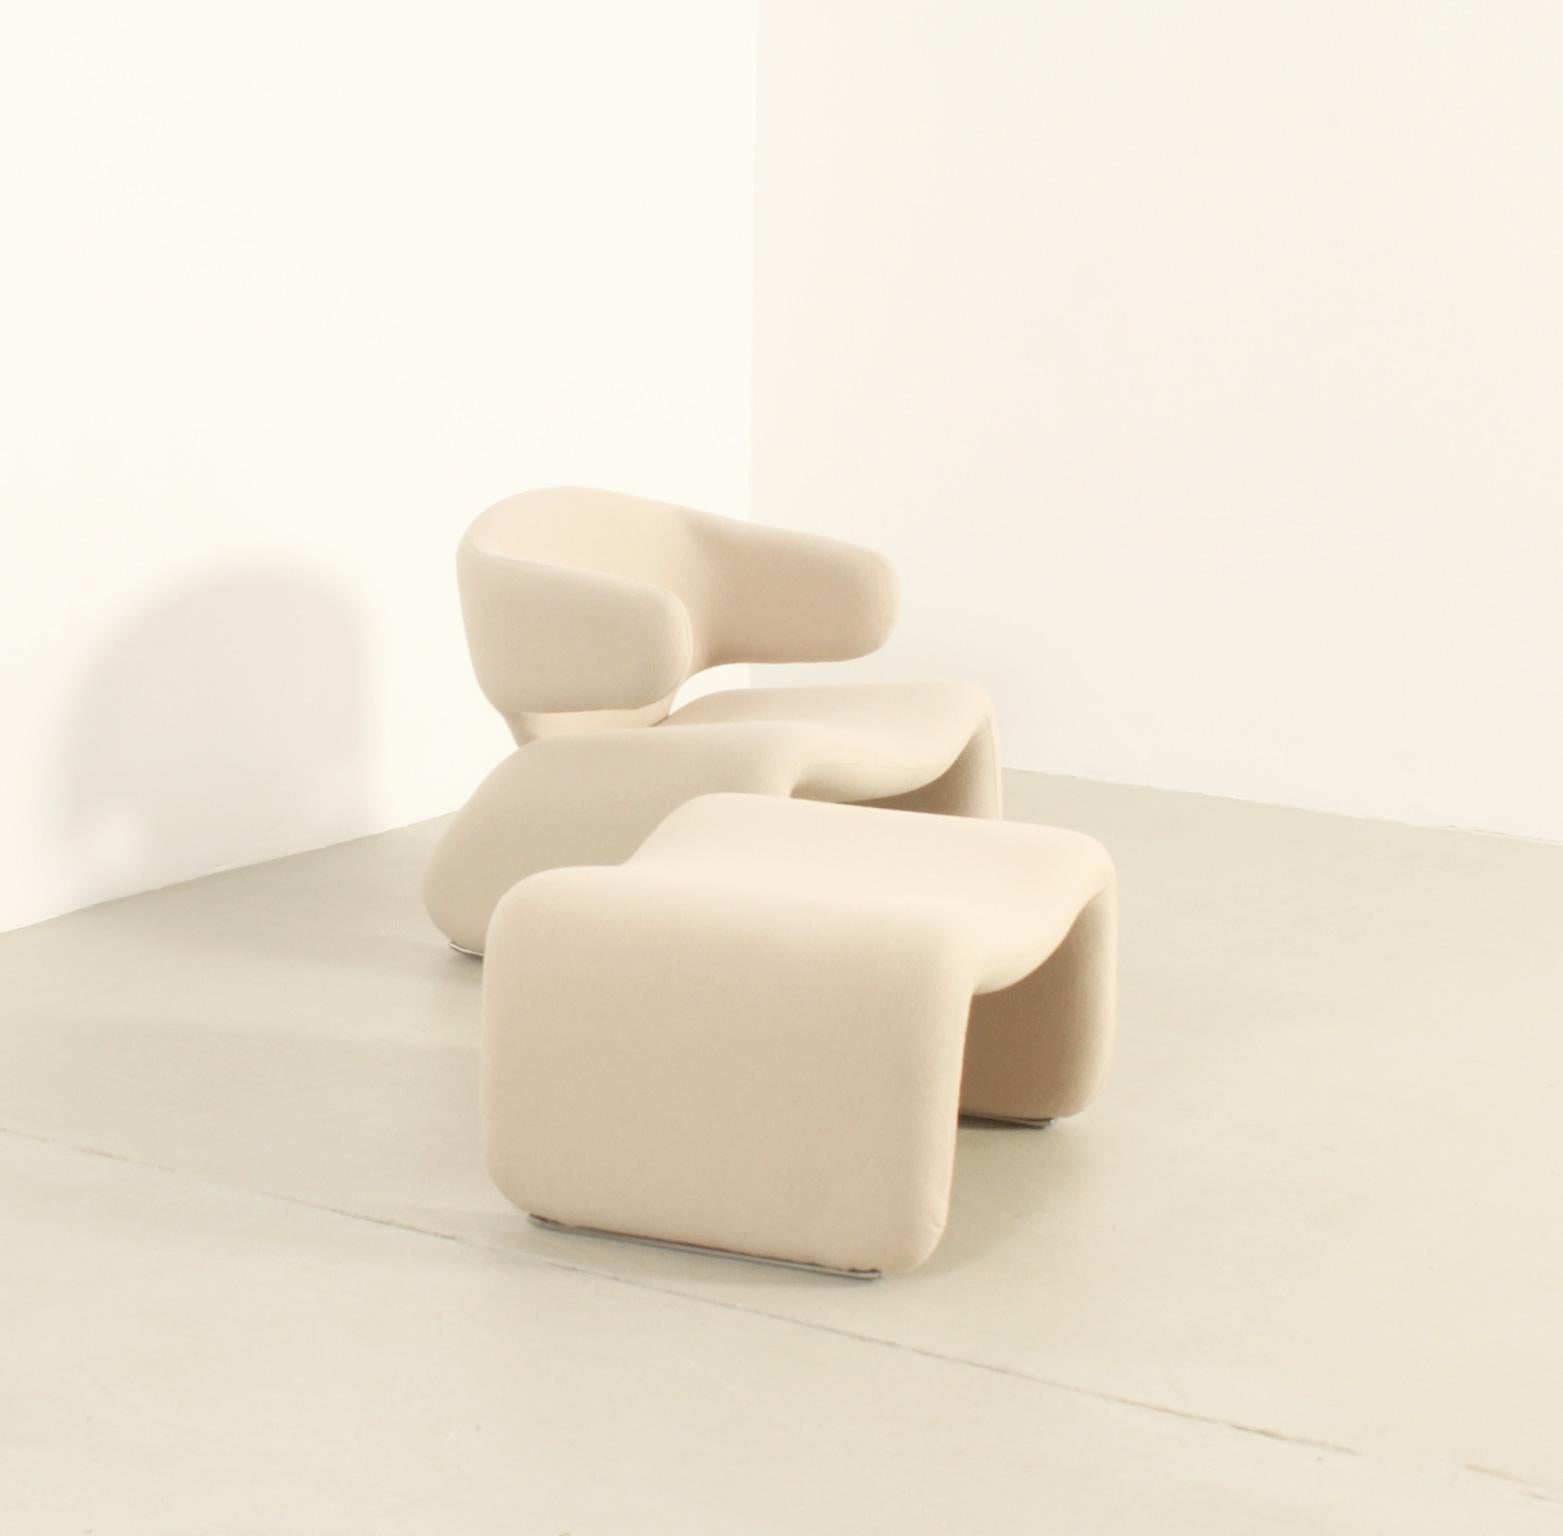 Dijnn Armchair and Ottoman by Olivier Mourgue for Airborne, France, 1965 For Sale 4